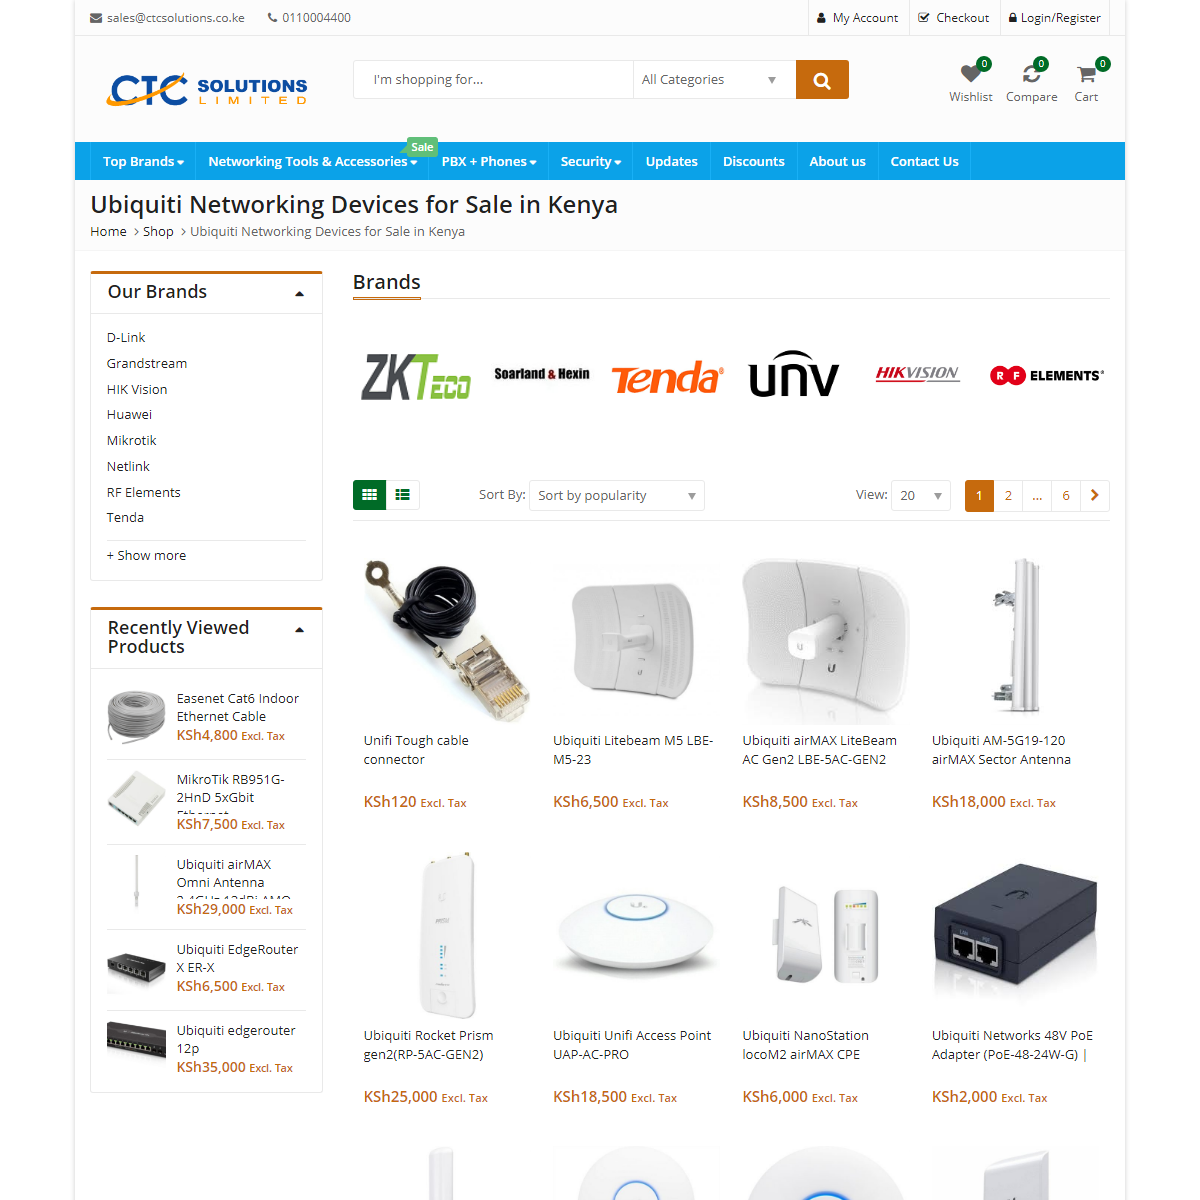 A complete backup of https://www.ctcsolutions.co.ke/product-category/ubiquiti-networking-devices-for-sale-in-kenya/